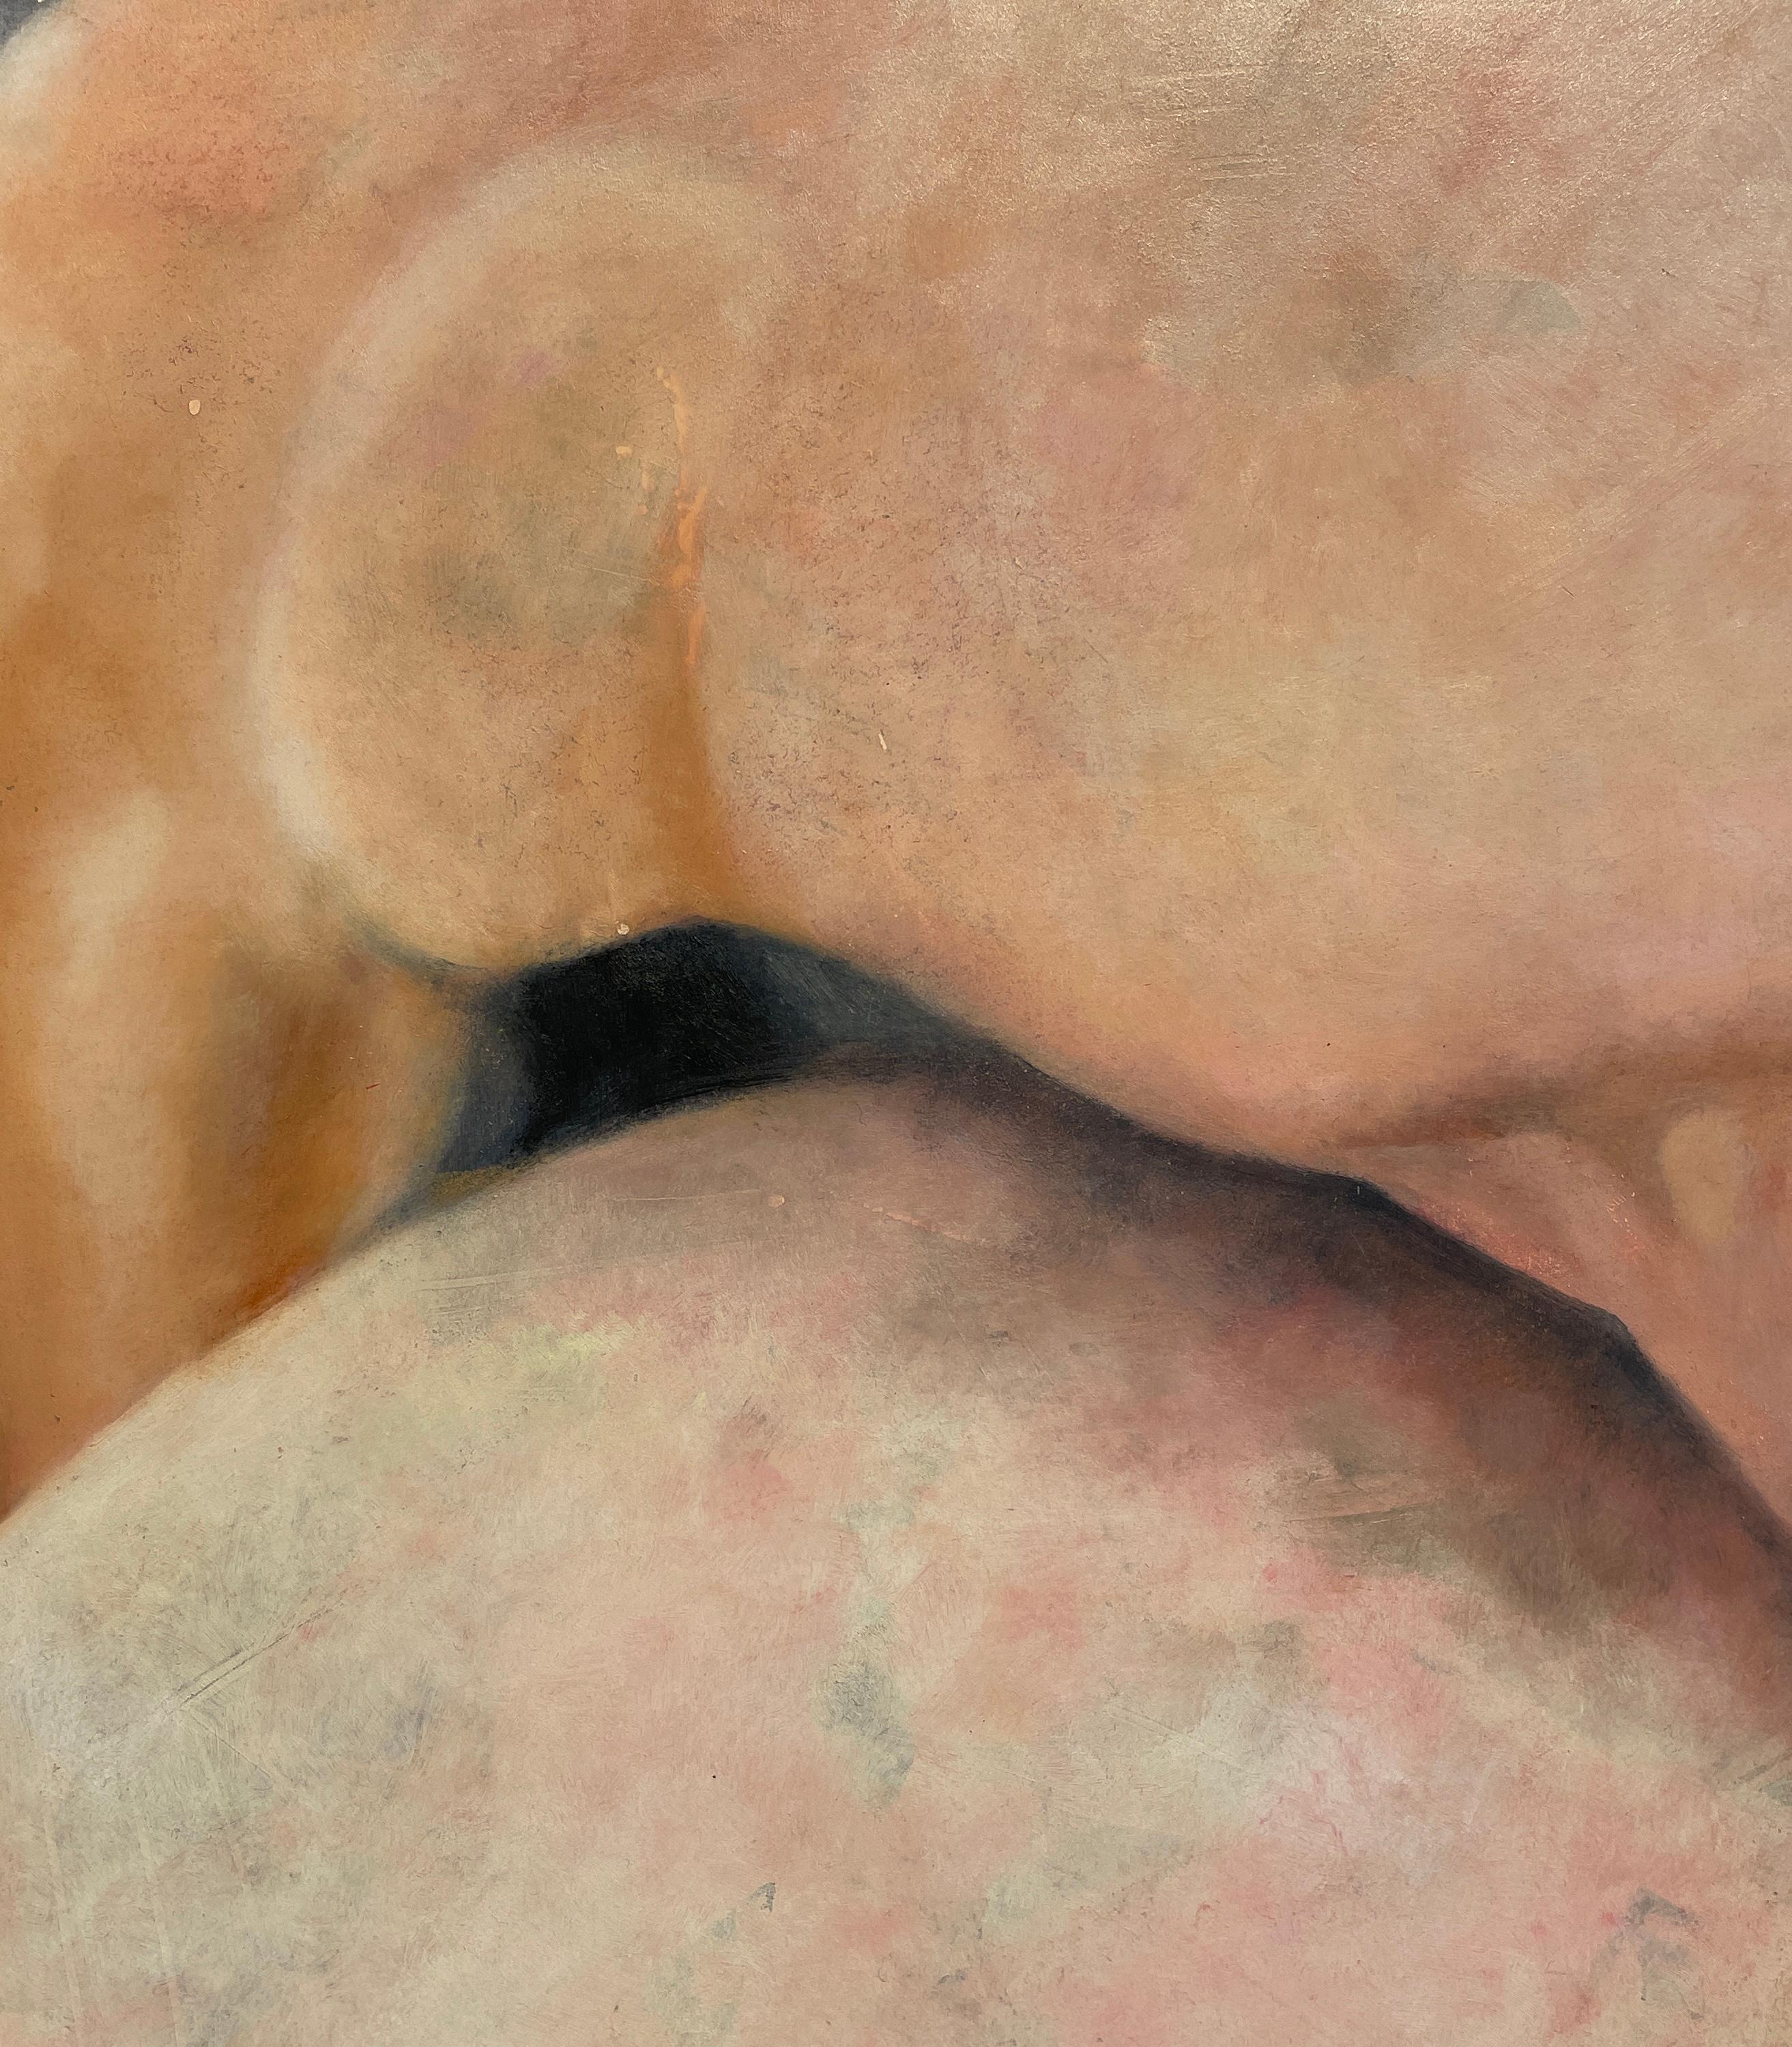 Shield Me - Nude Figures, Intimate Portrayal of a Couple, Original Oil on Panel - Beige Nude Painting by Rick Sindt